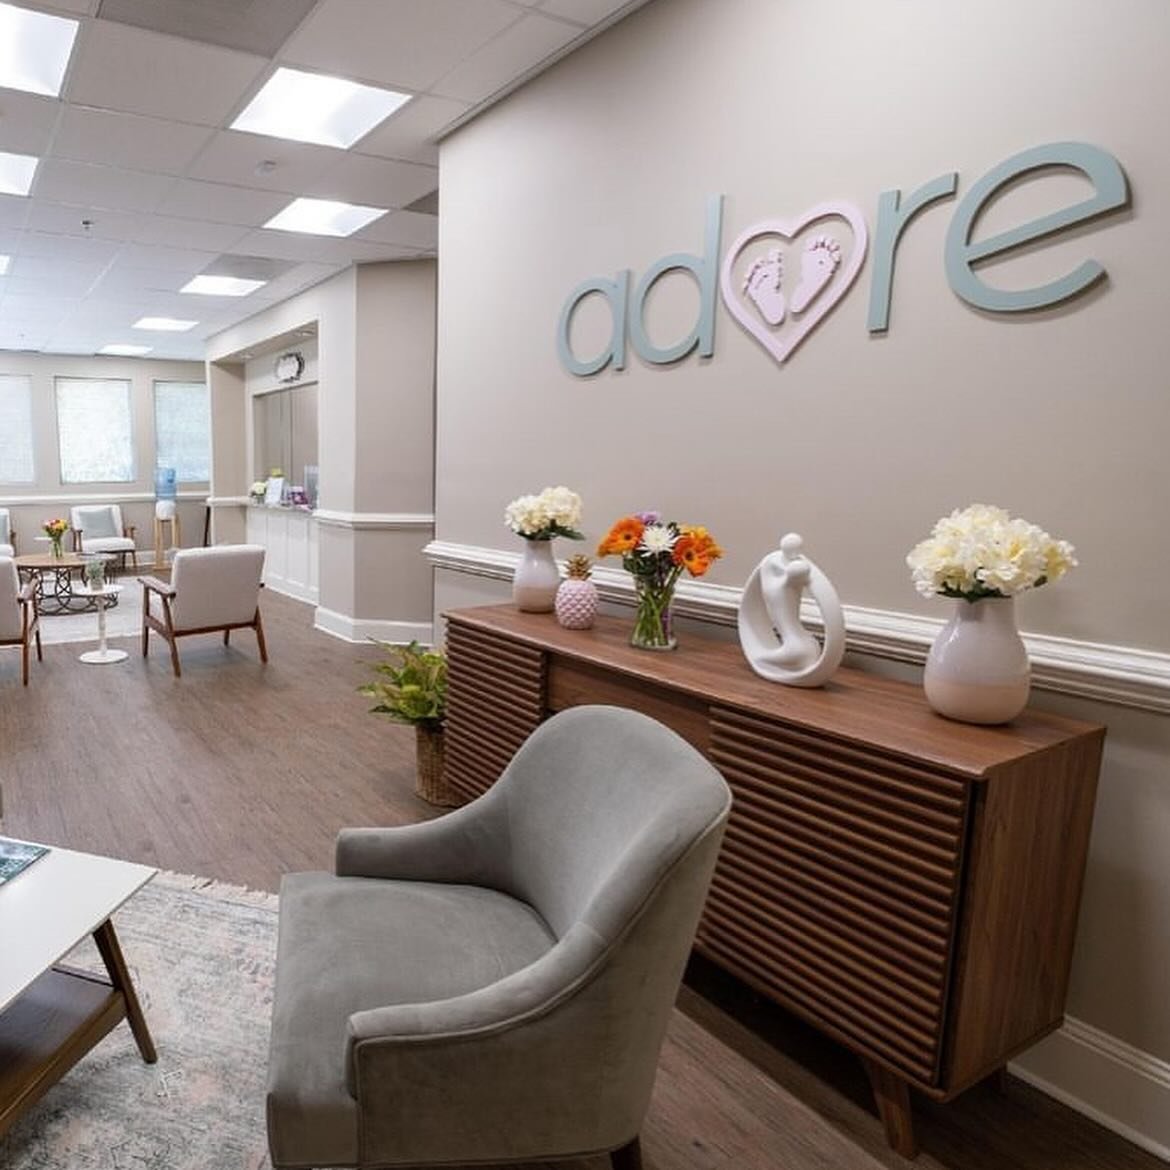 We love building relationships with other medical practices in the community, especially when it comes to fertility and women&rsquo;s health. We&rsquo;ve worked with many patients of Adore Fertility and FINALLY we visited their beautiful clinic in Mt